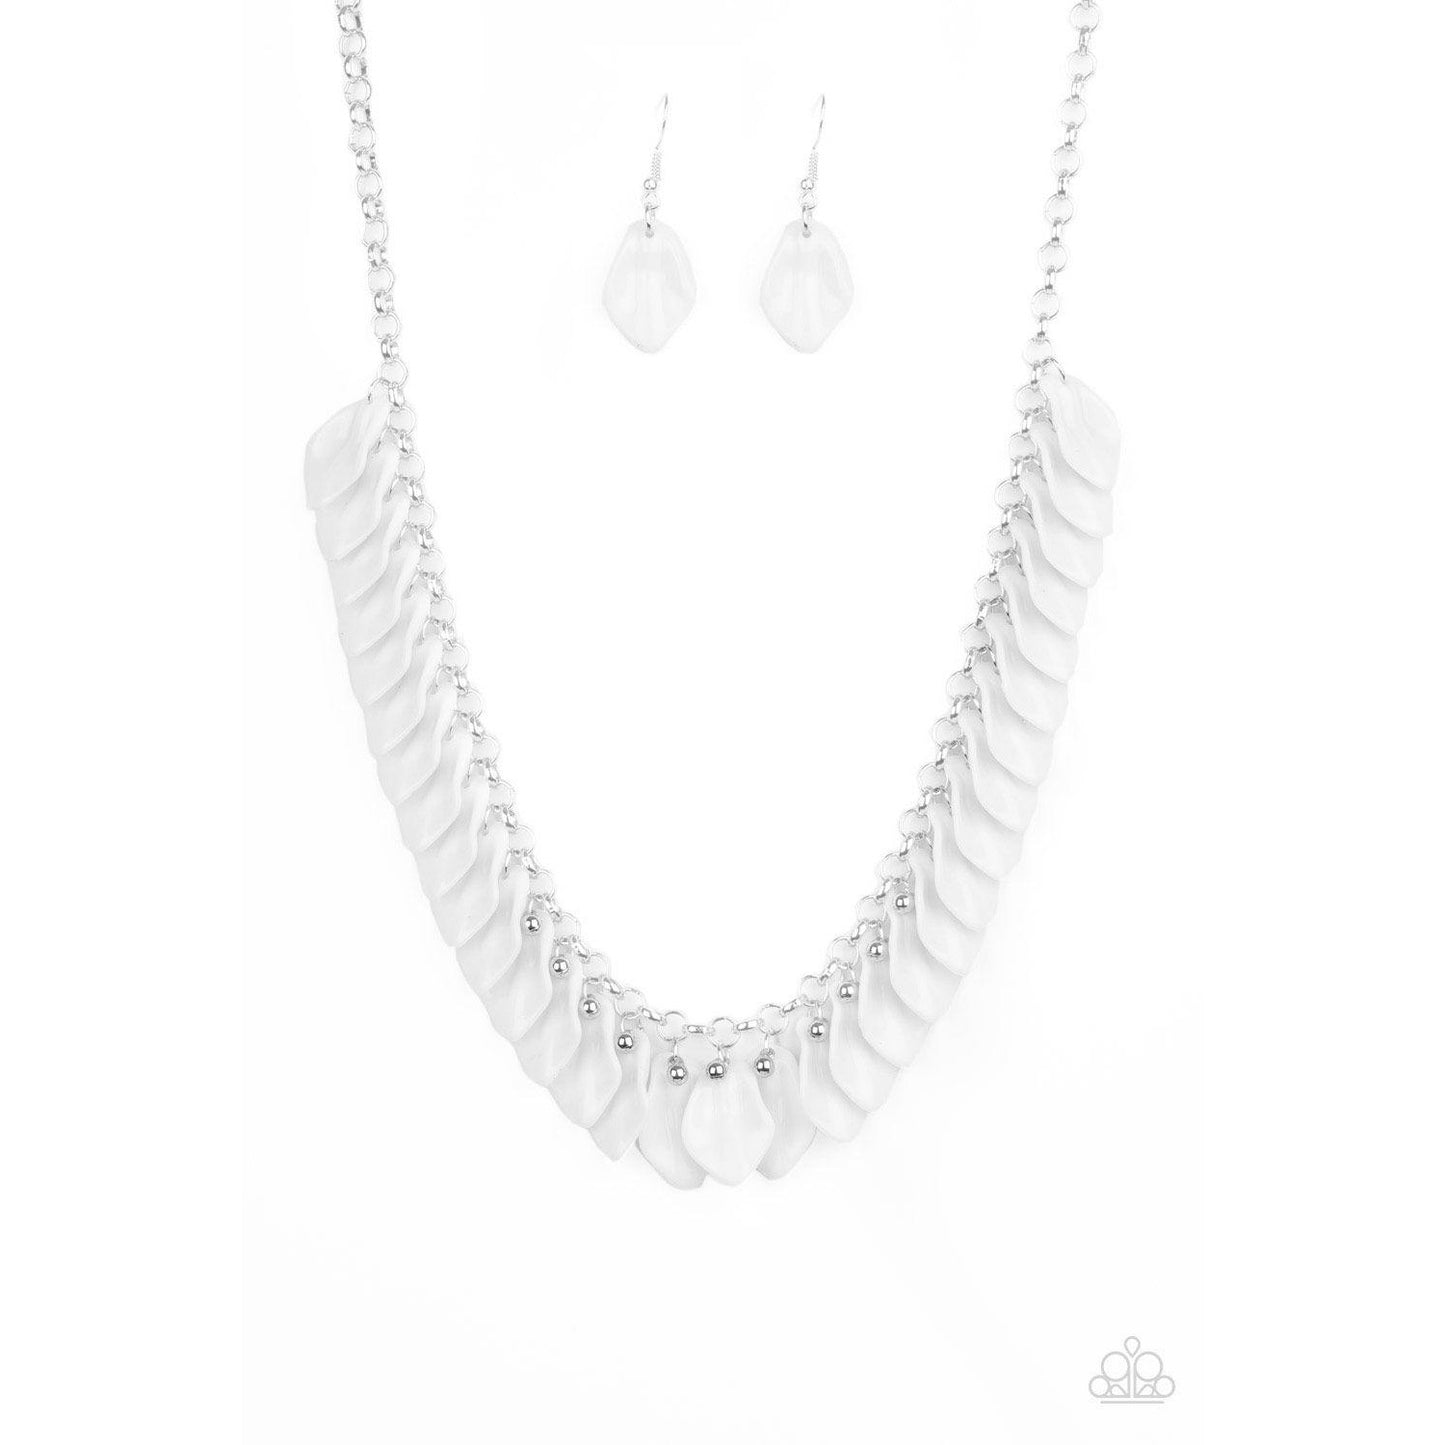 Super Bloom – White Necklace Earring Jewelry Set